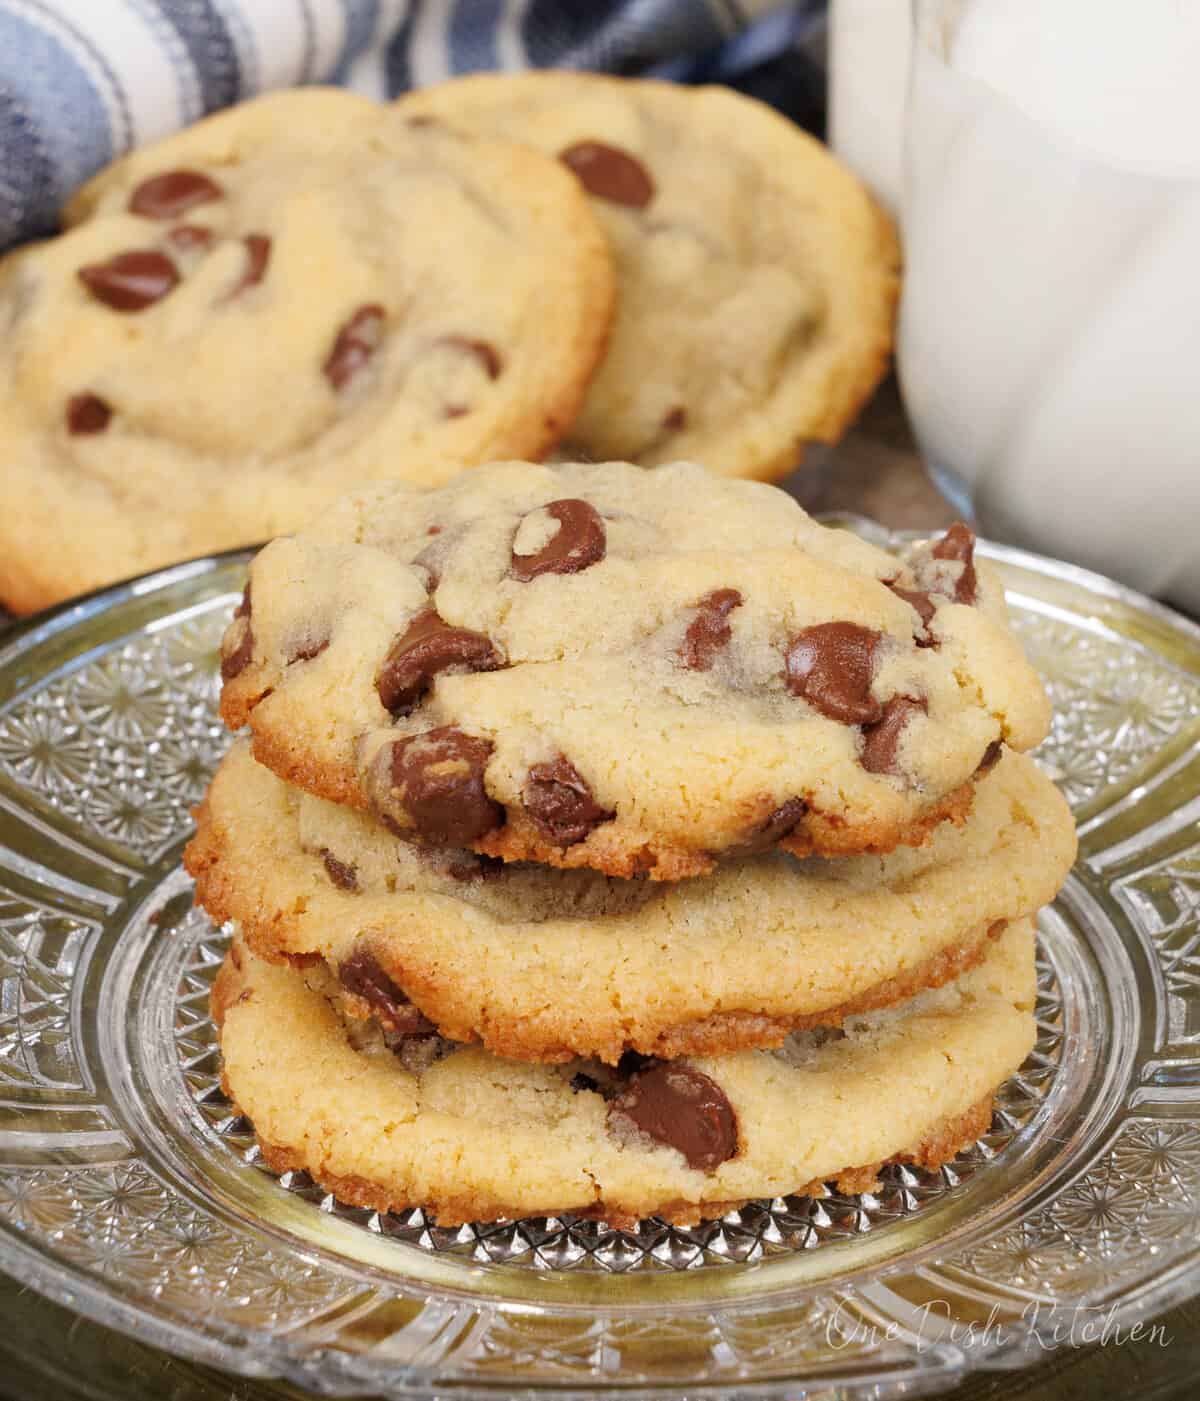 three chocolate chip cookies stacked on top of each other on a clear plate next to a glass of milk.